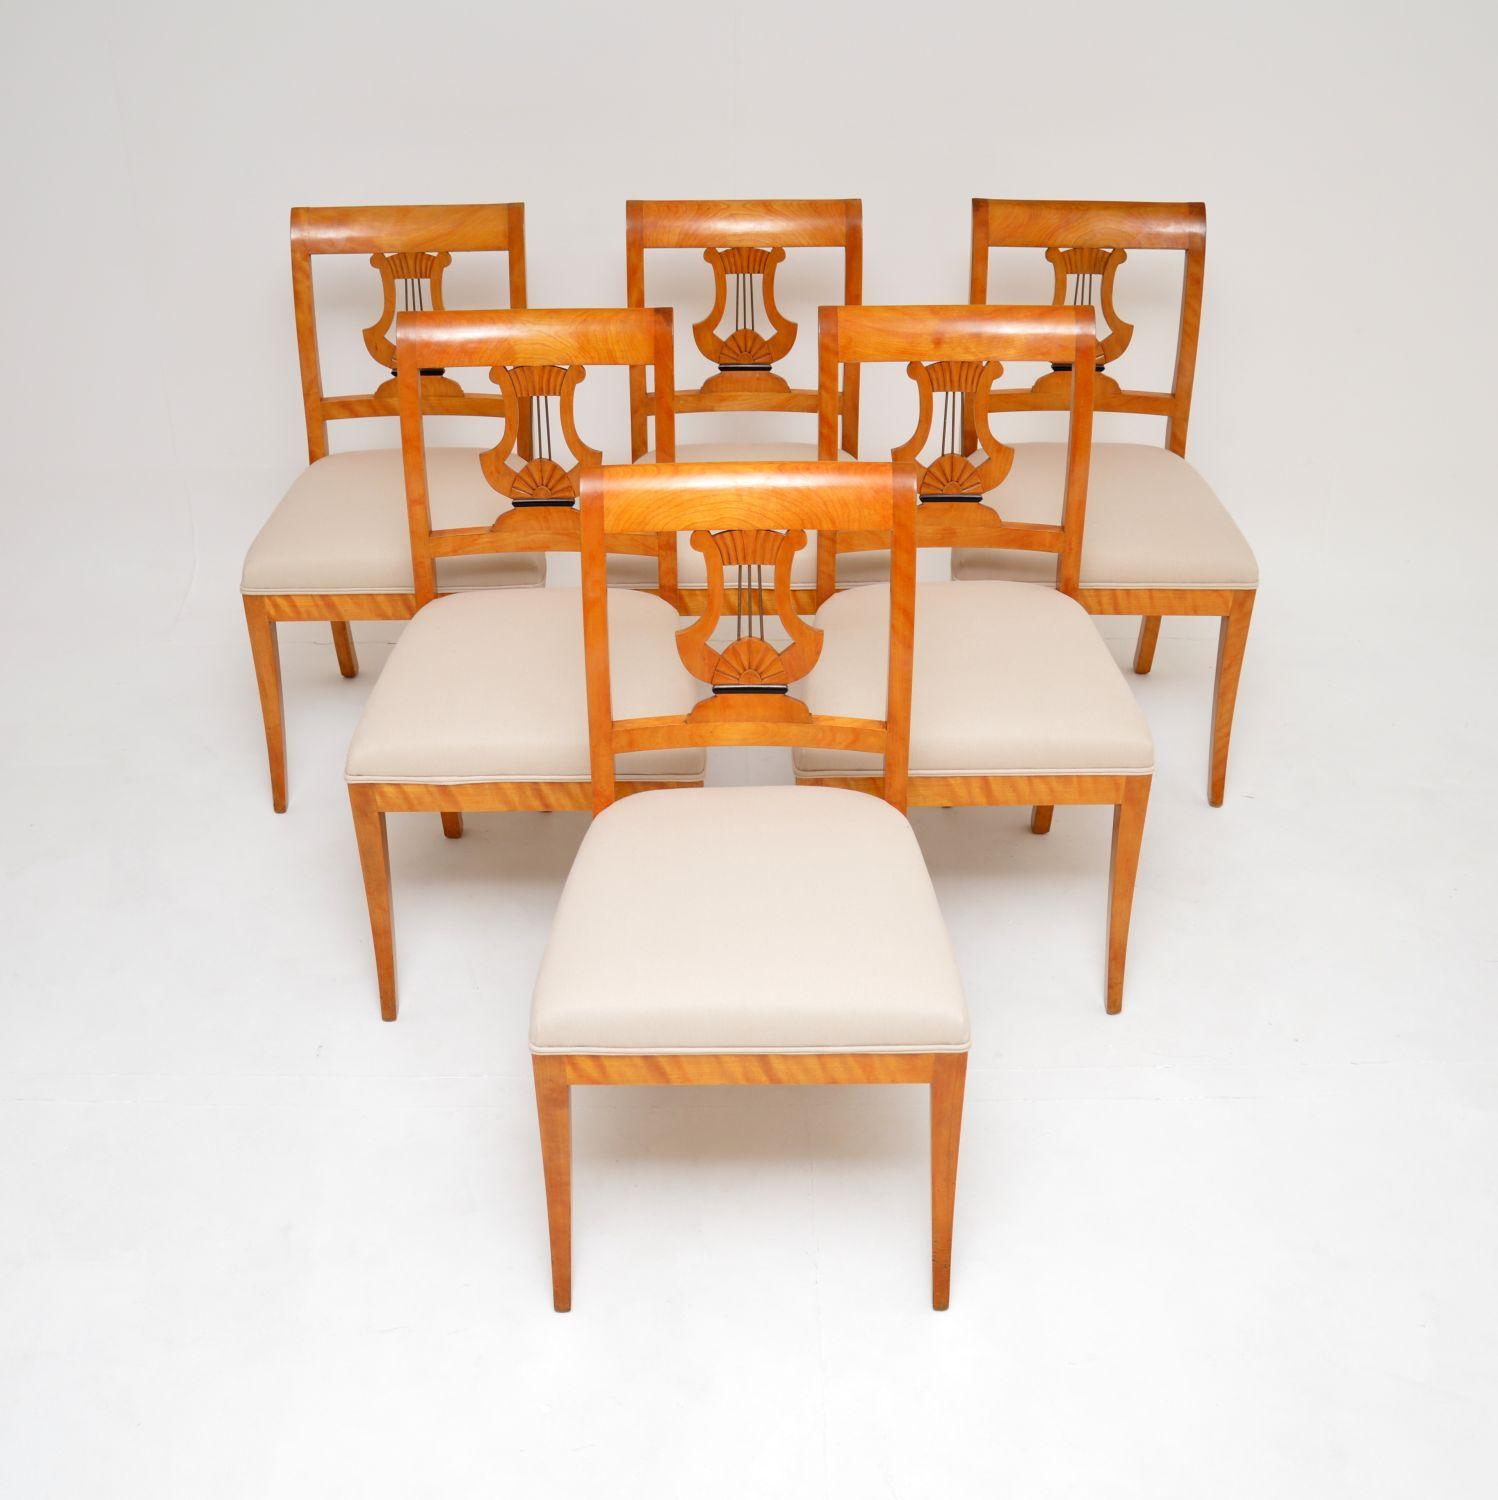 A stunning set of six antique Swedish Biedermeier Style dining chairs in satin birch. They were recently imported from Sweden, they date from around the 1890-1910 period.

The quality is superb, they are very sturdy and comfortable too. The satin